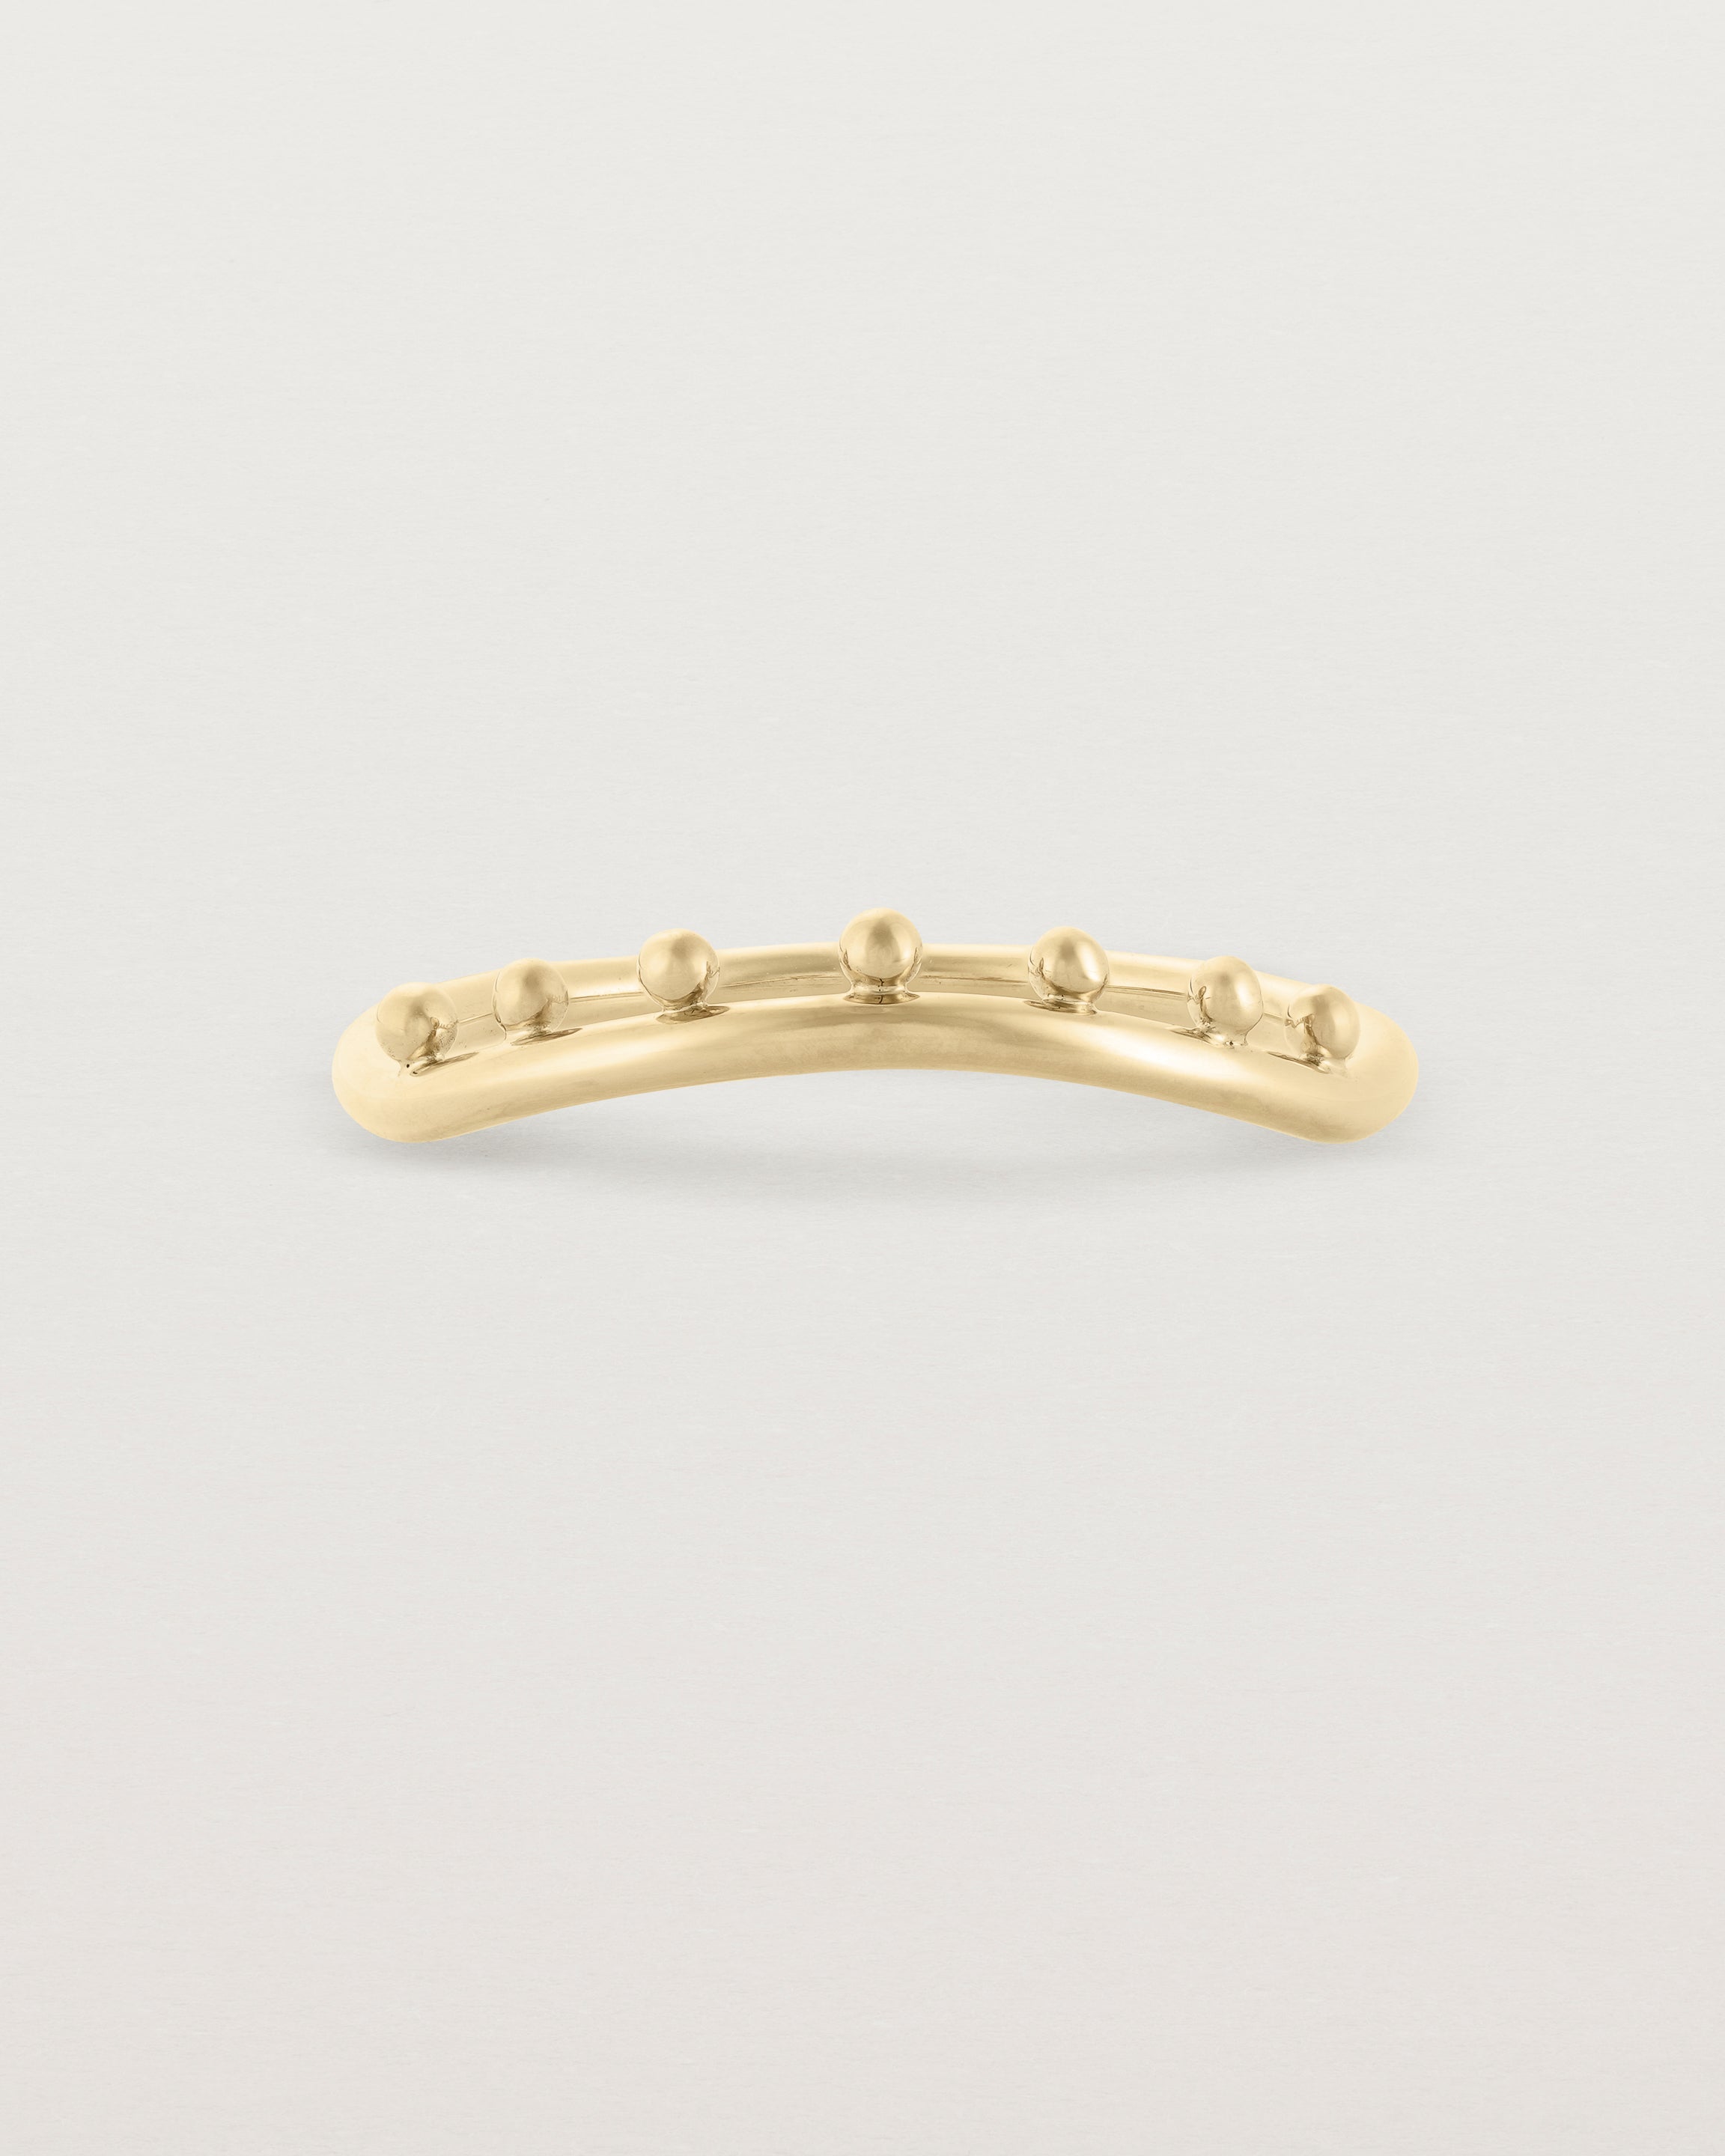 A gentle arc ring with dot detailing along the top of the arc, crafted in yellow gold